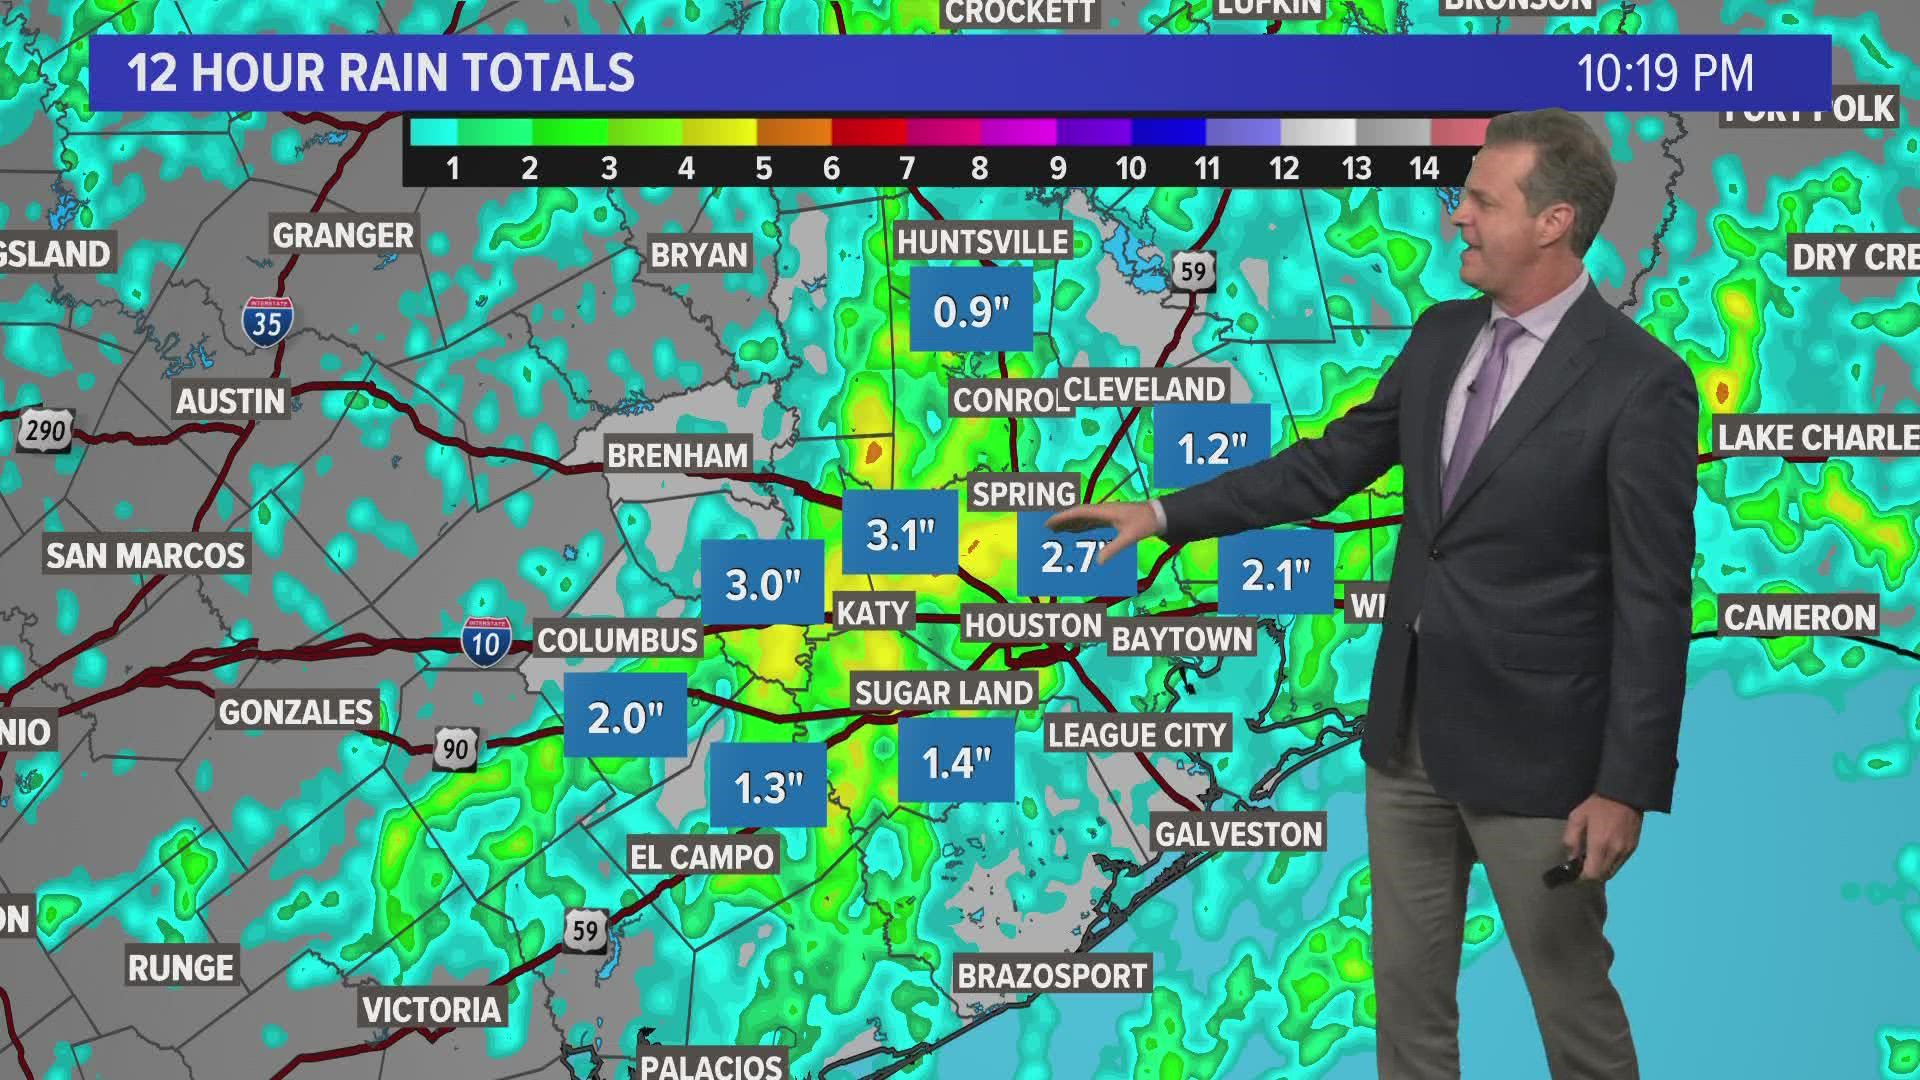 KHOU 11 Chief Meteorologist David Paul looks at the Houston weather at 10:20 p.m. on Wednesday, Aug. 10, 2022.